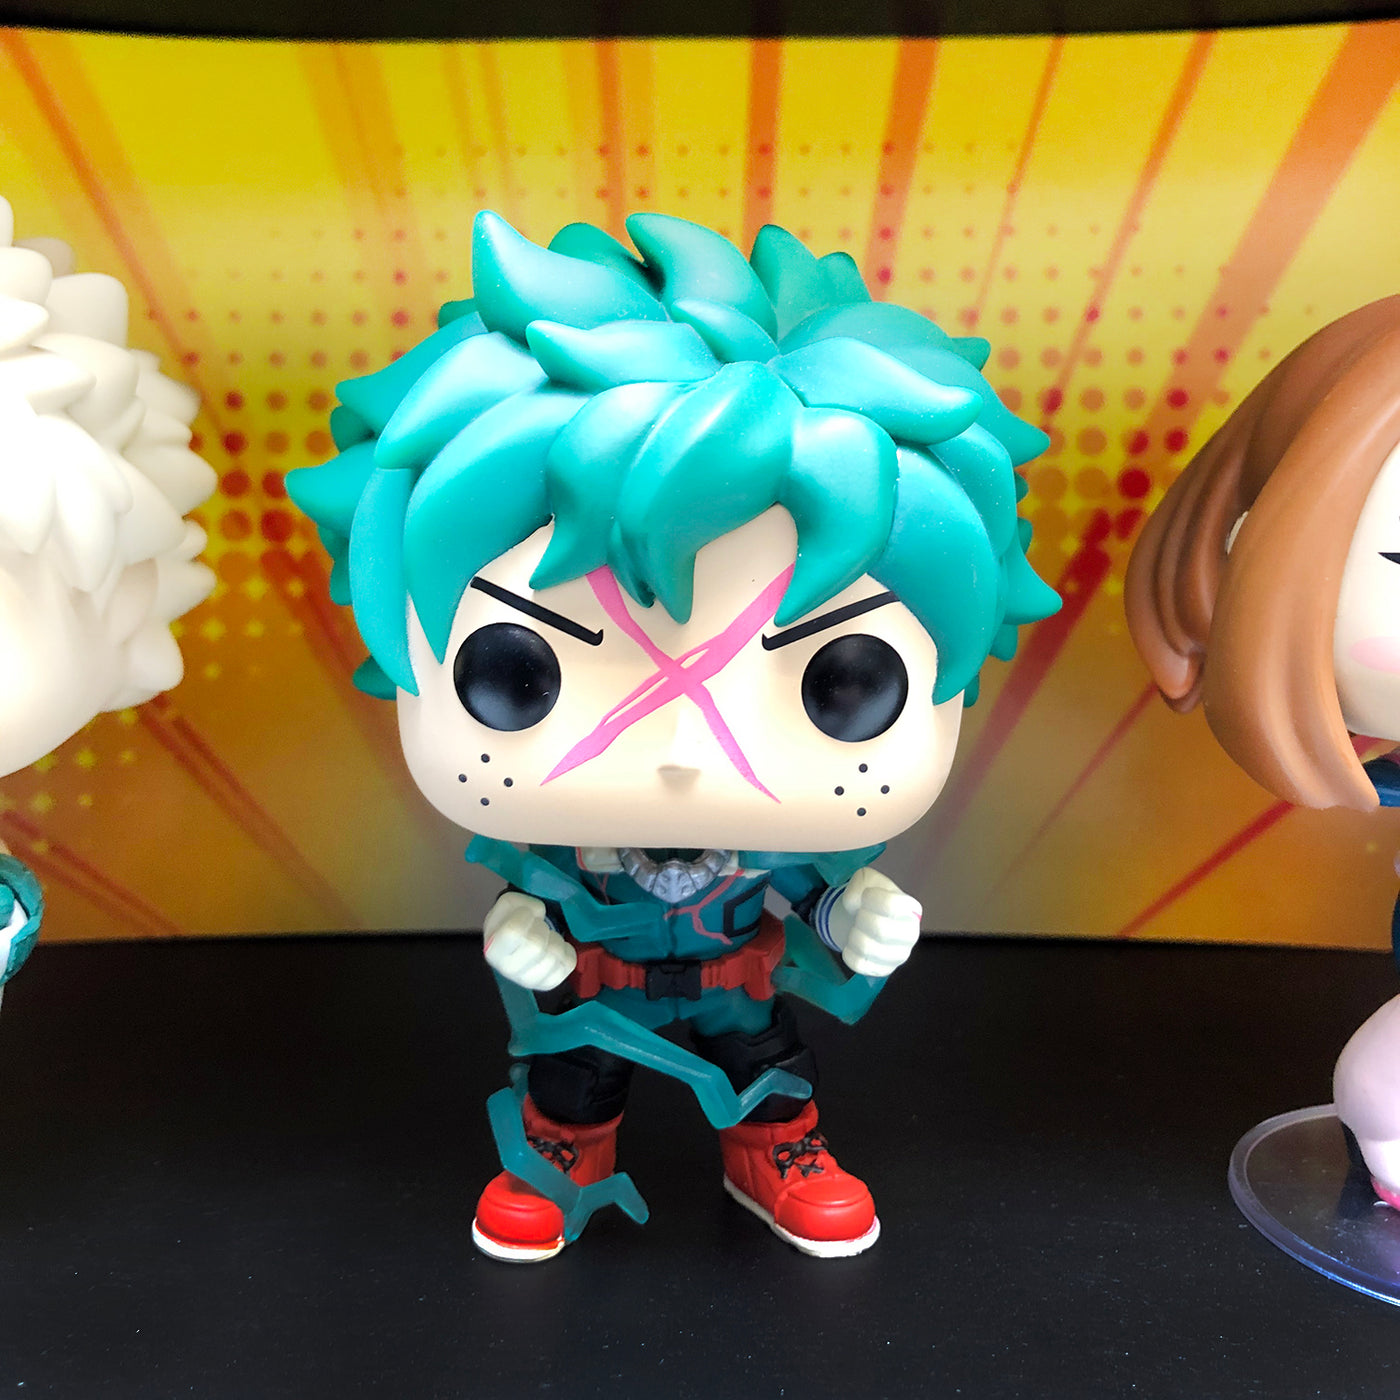 **BACK IN STOCK MAY 13TH** MY HERO ACADEMIA - Display Case for Funko Pops with 3 Backdrop Inserts, Corrugated Cardboard - Display Geek